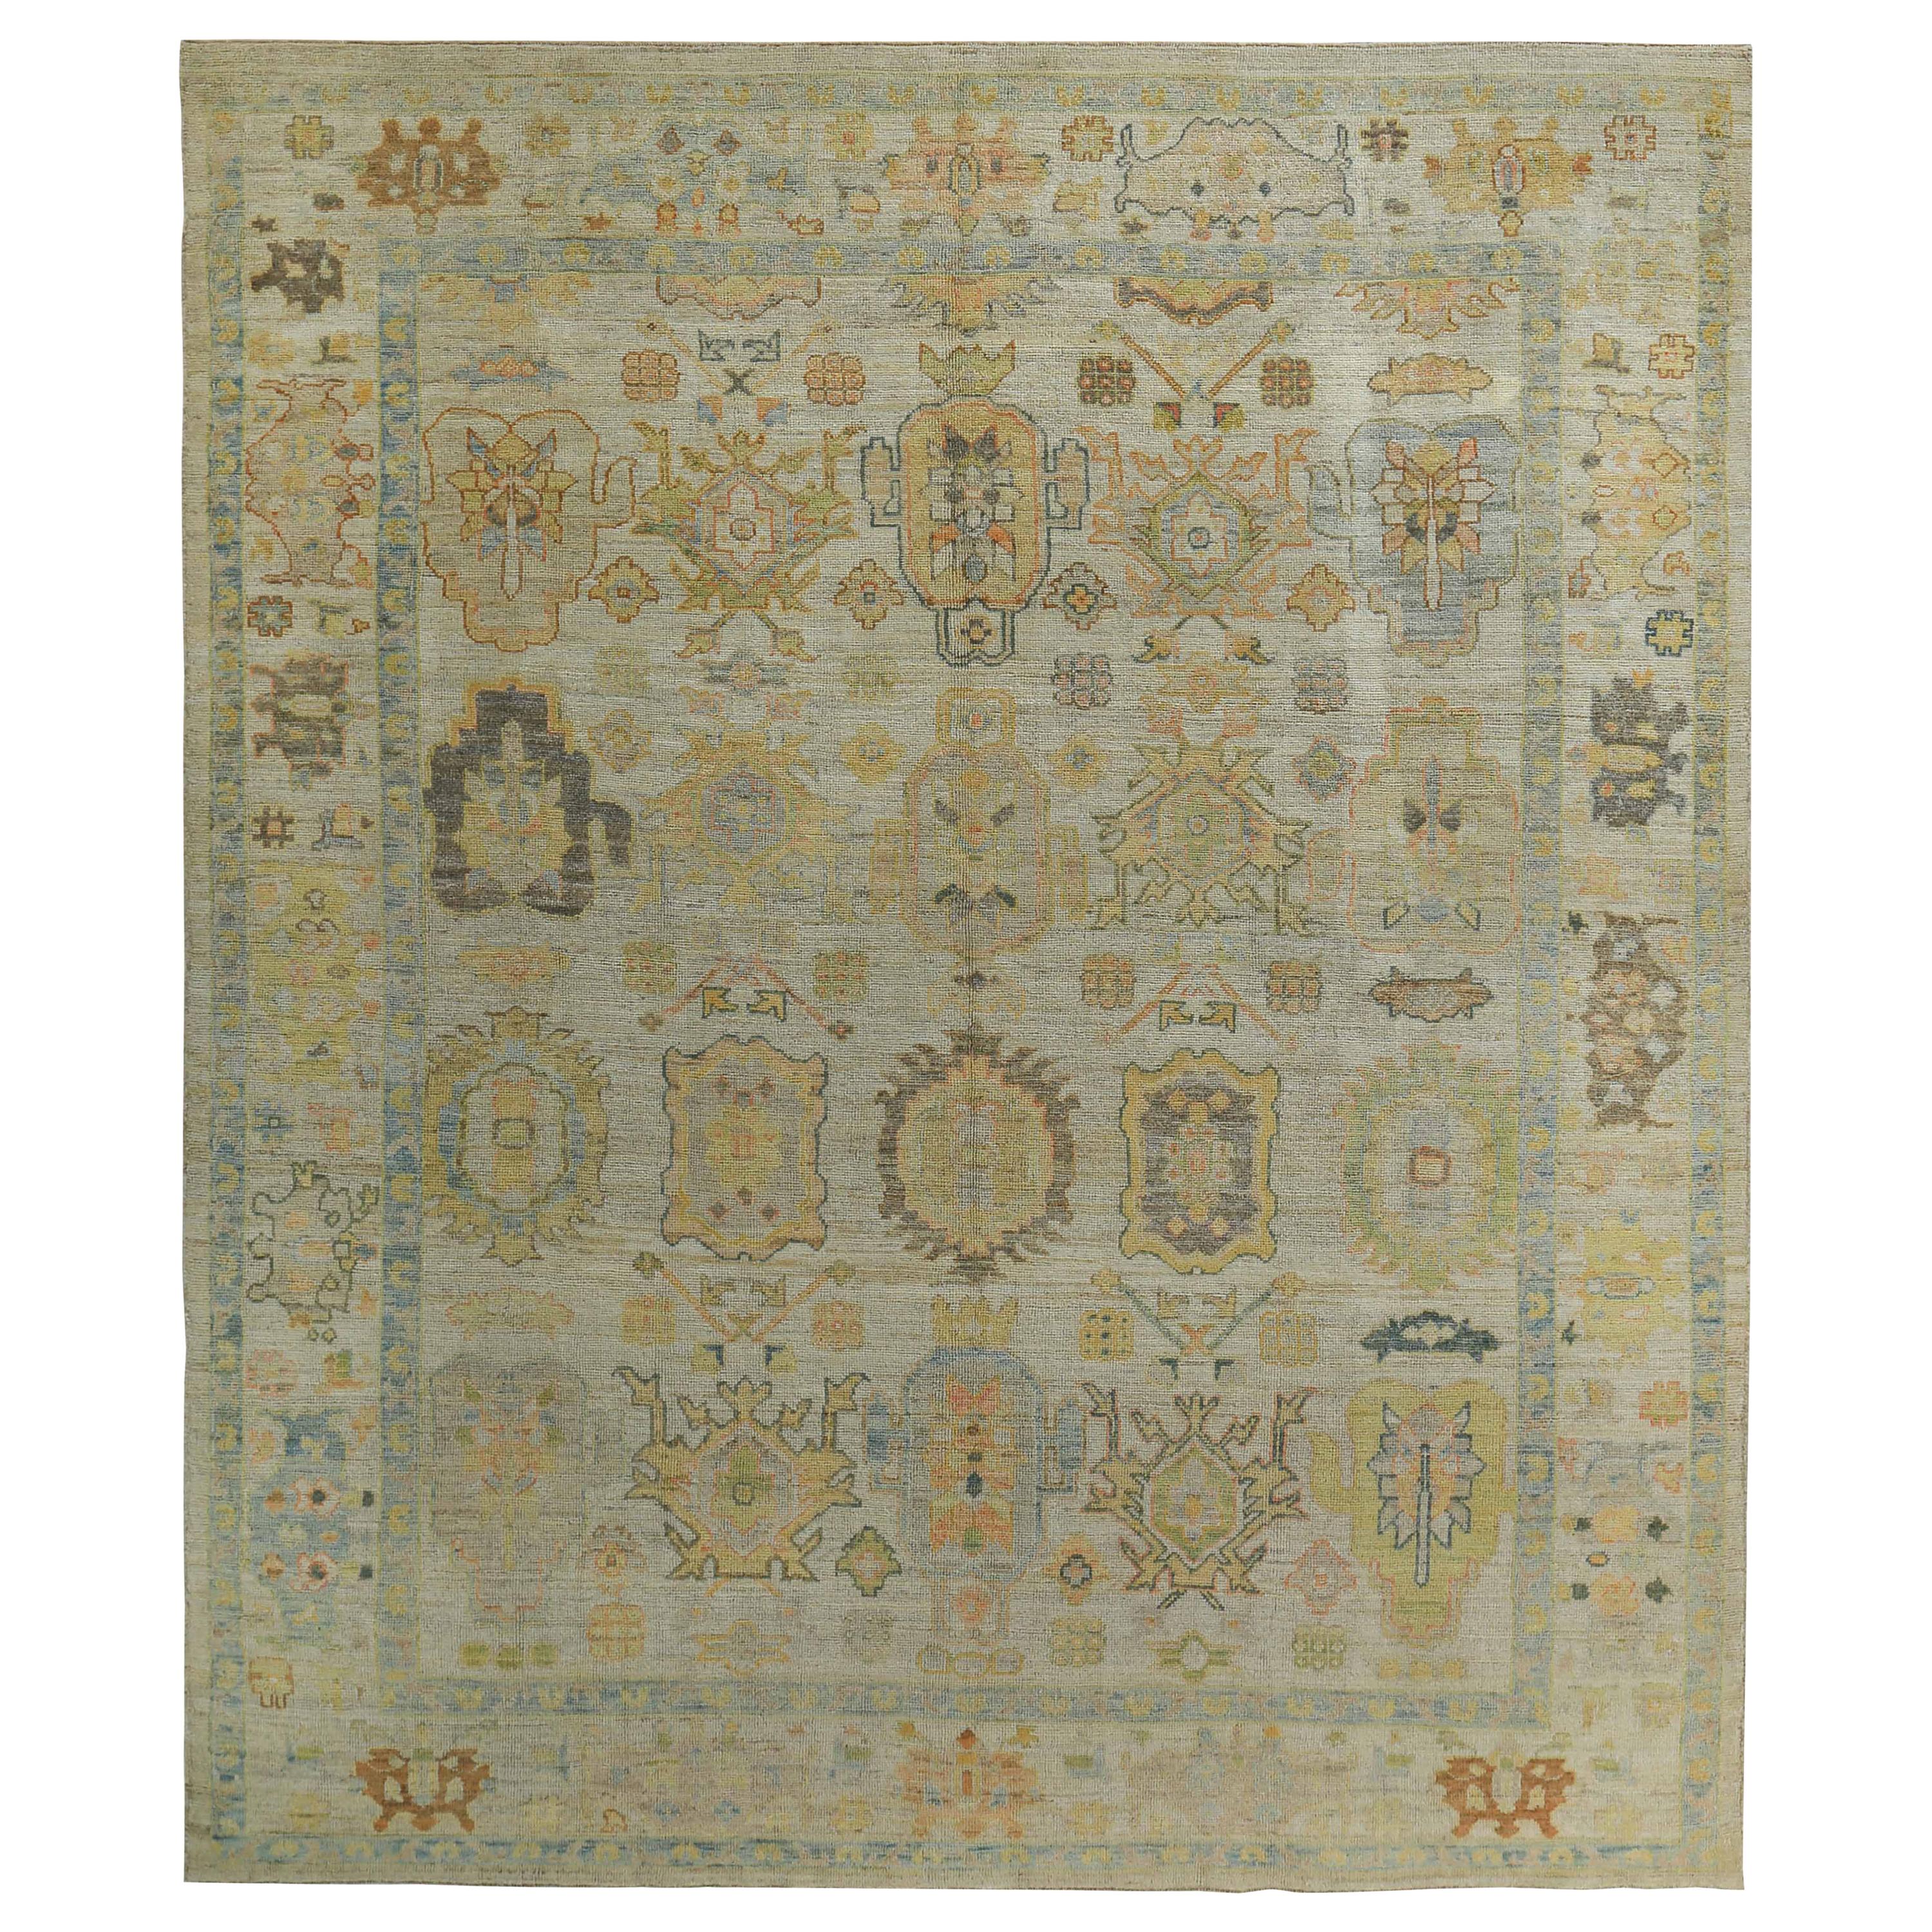 New Turkish Oushak Rug with Green and Yellow Floral Details on Ivory Field